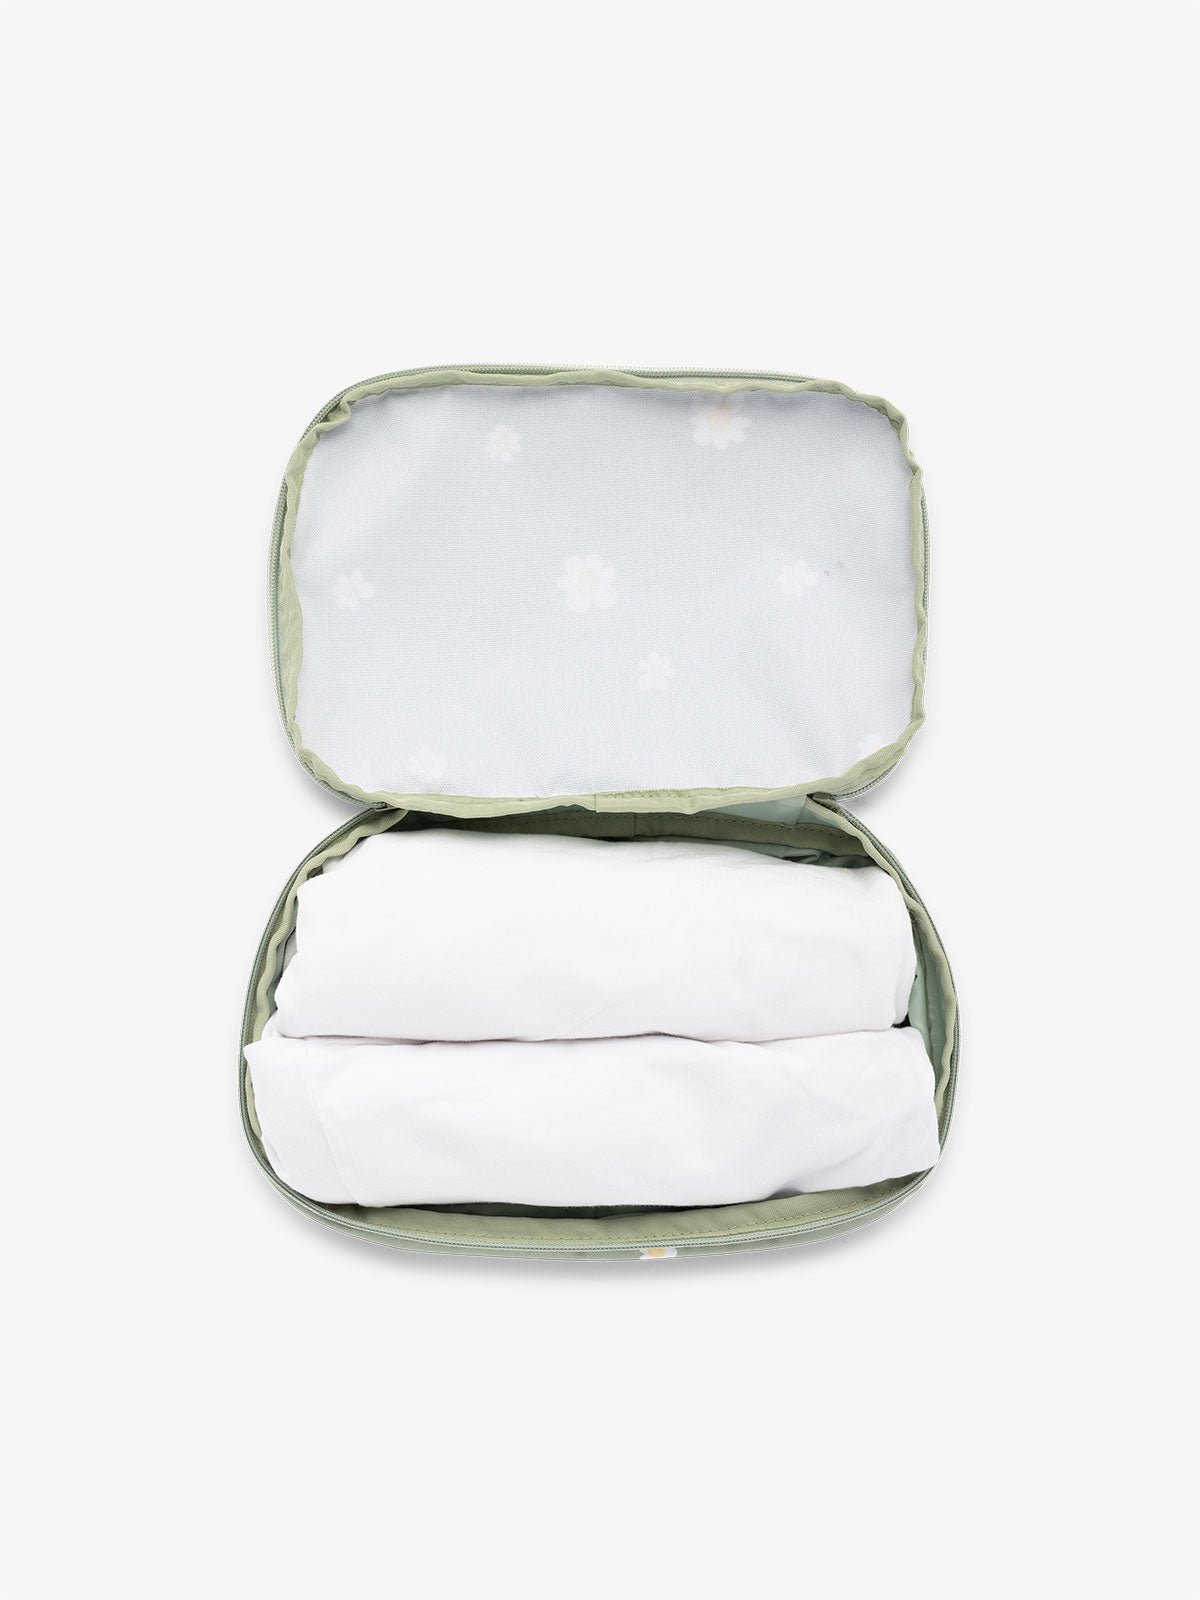 CALPAK small packing cubes for travel made with durable material in daisy